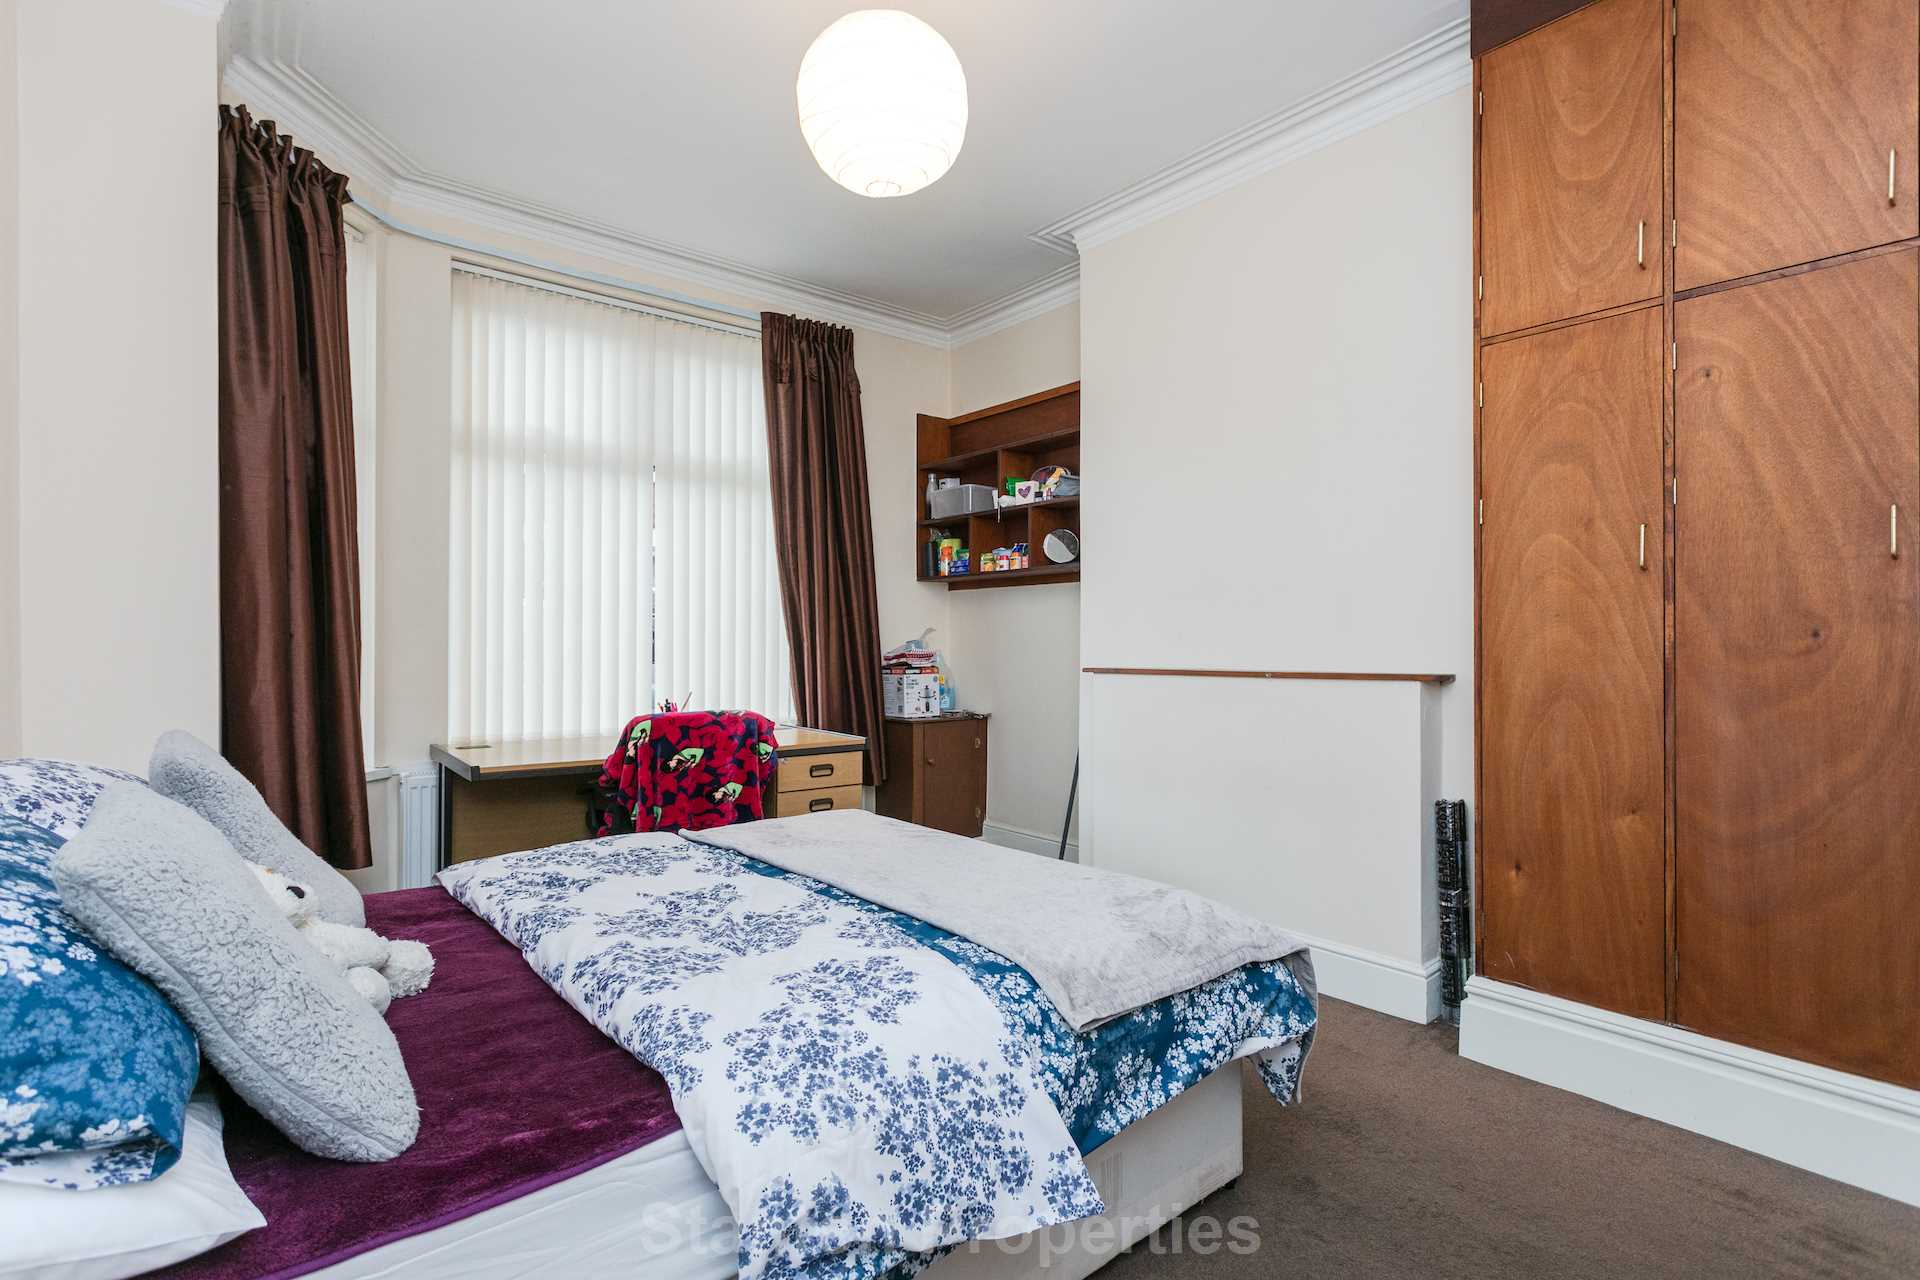 £112 pppw, Wallace Avenue, Rusholme, Image 6